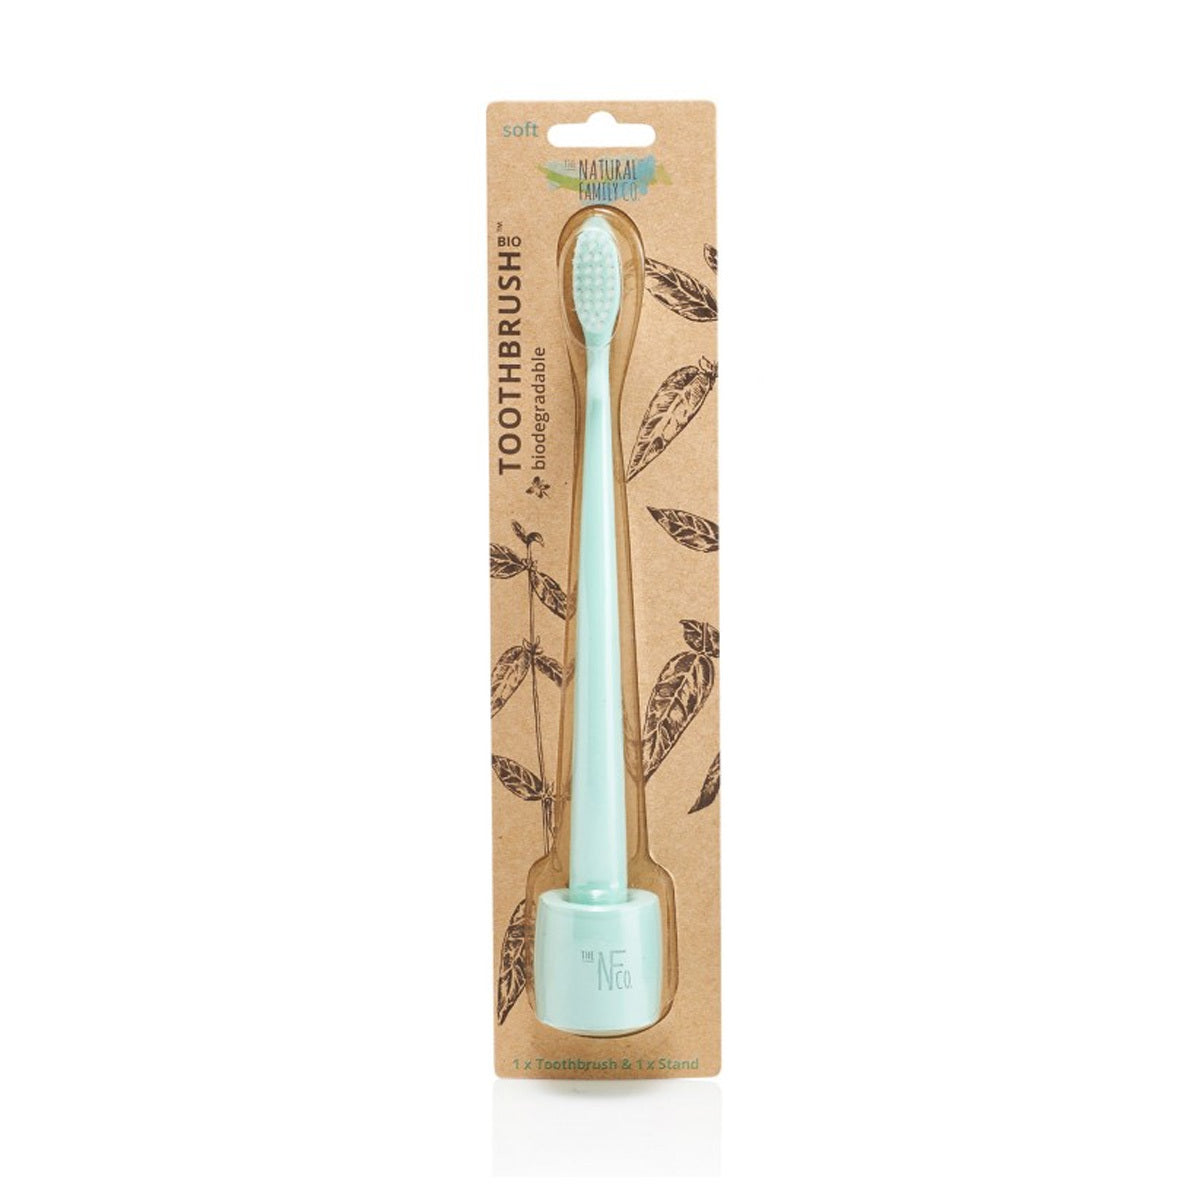 Primary image of Bio Toothbrush + Stand - Rivermint